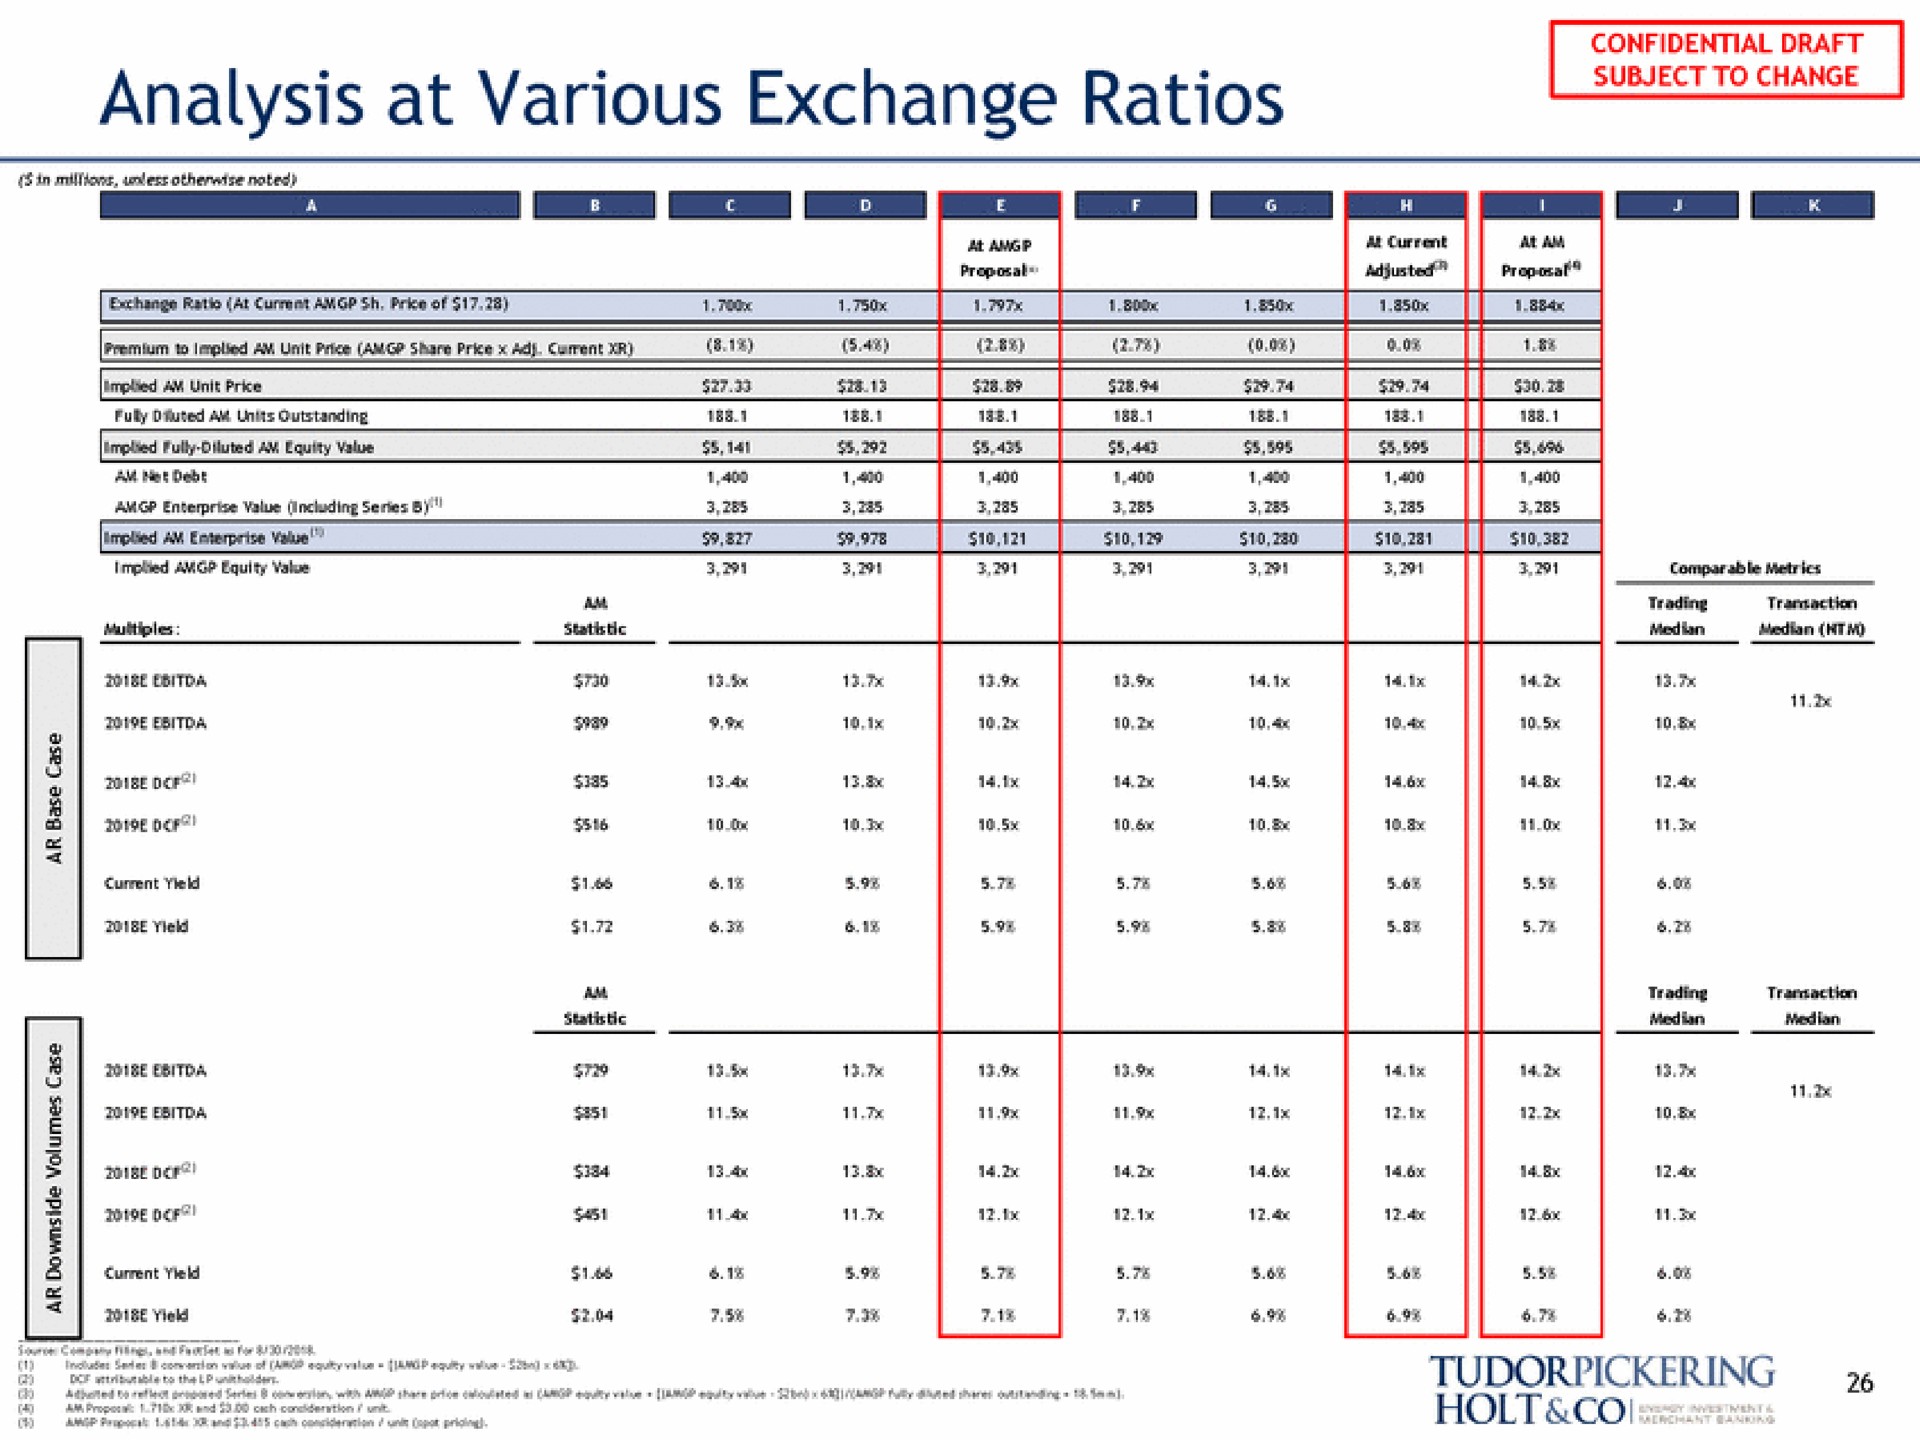 analysis at various exchange ratios a | Tudor, Pickering, Holt & Co